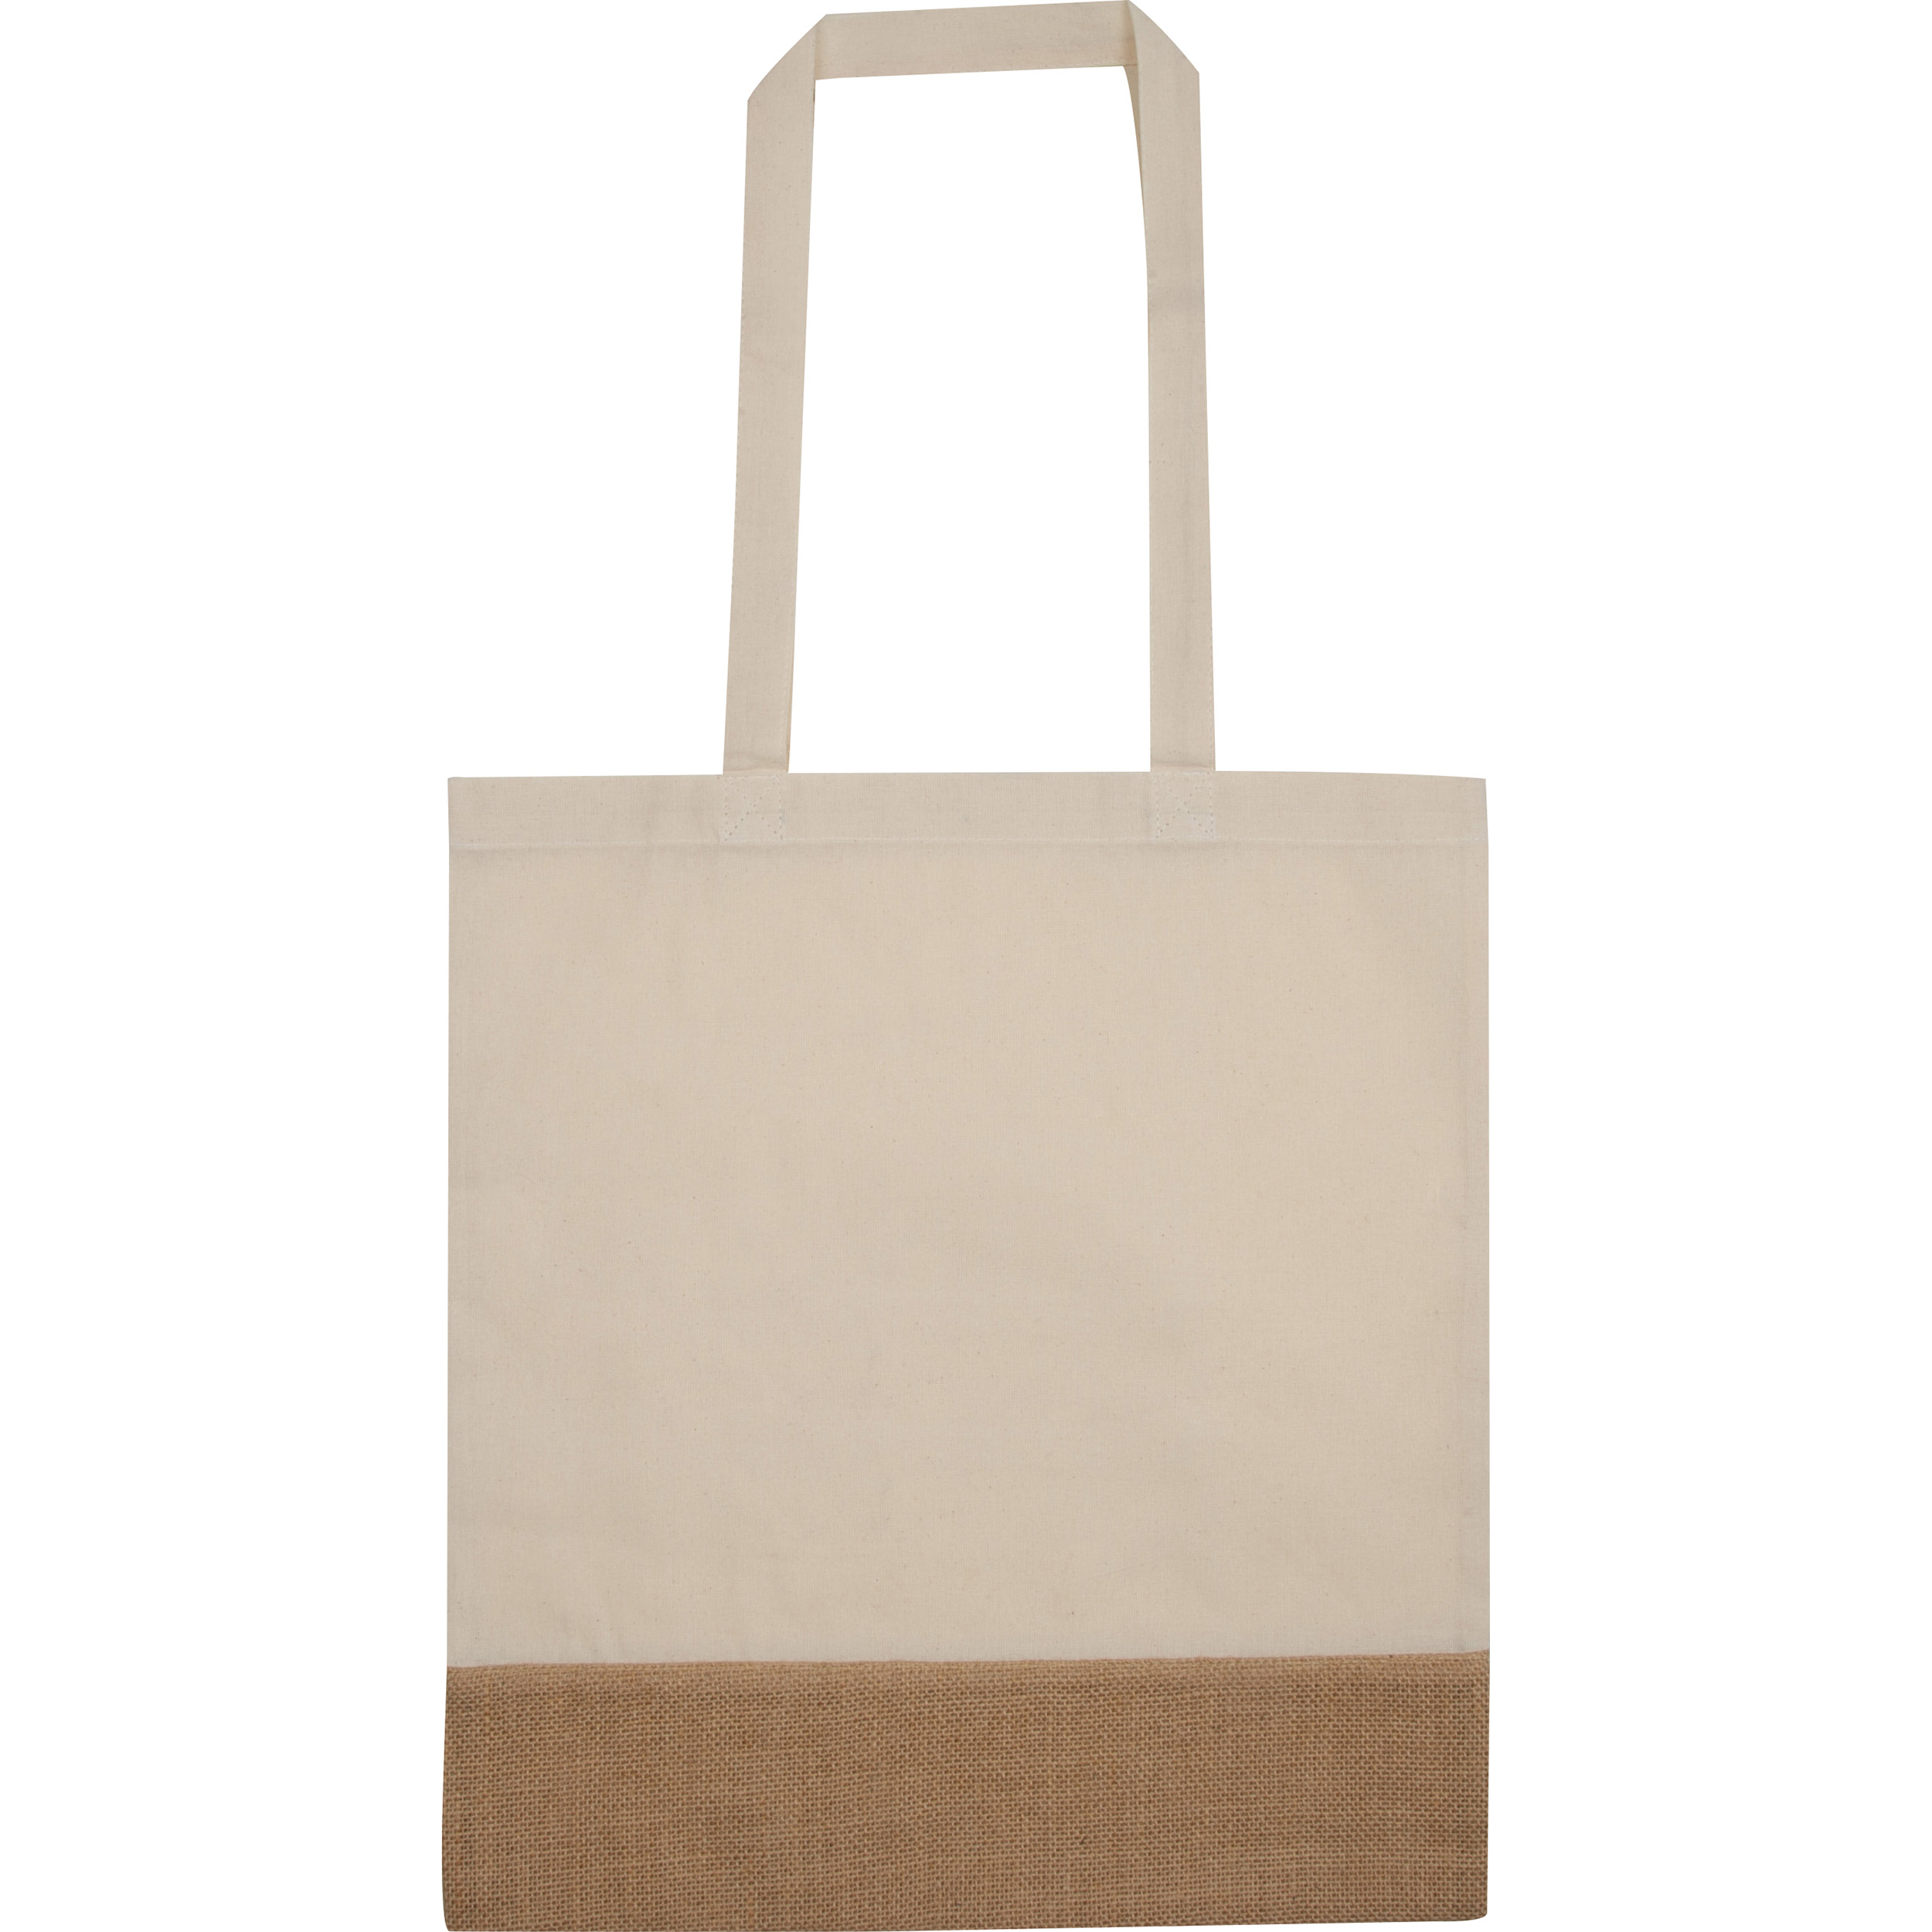 Carrying bag with jute bottom